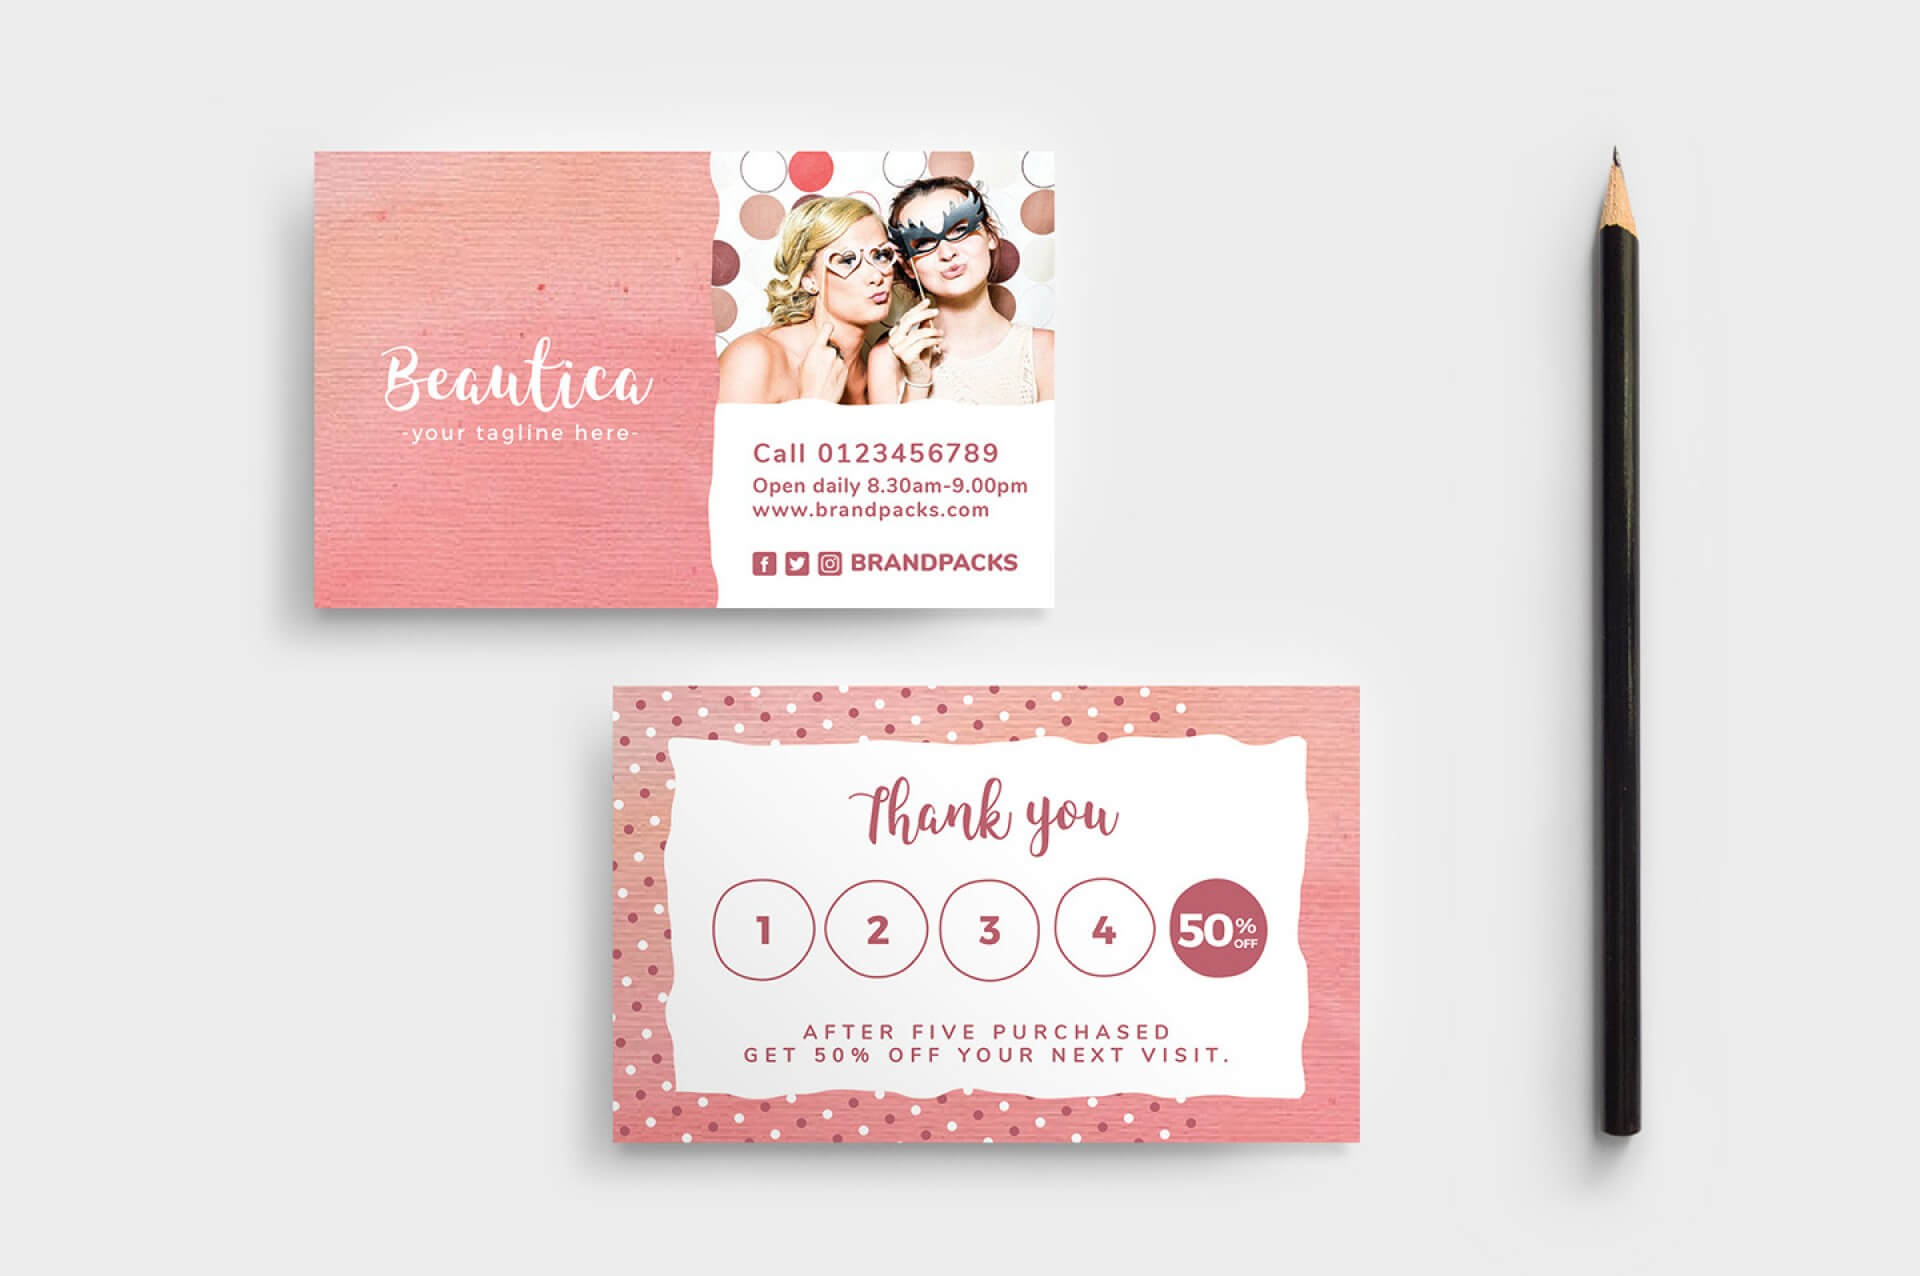 033 Loyalty Card Template Ideas Gift Registry Rare Free Within Loyalty Card Design Template